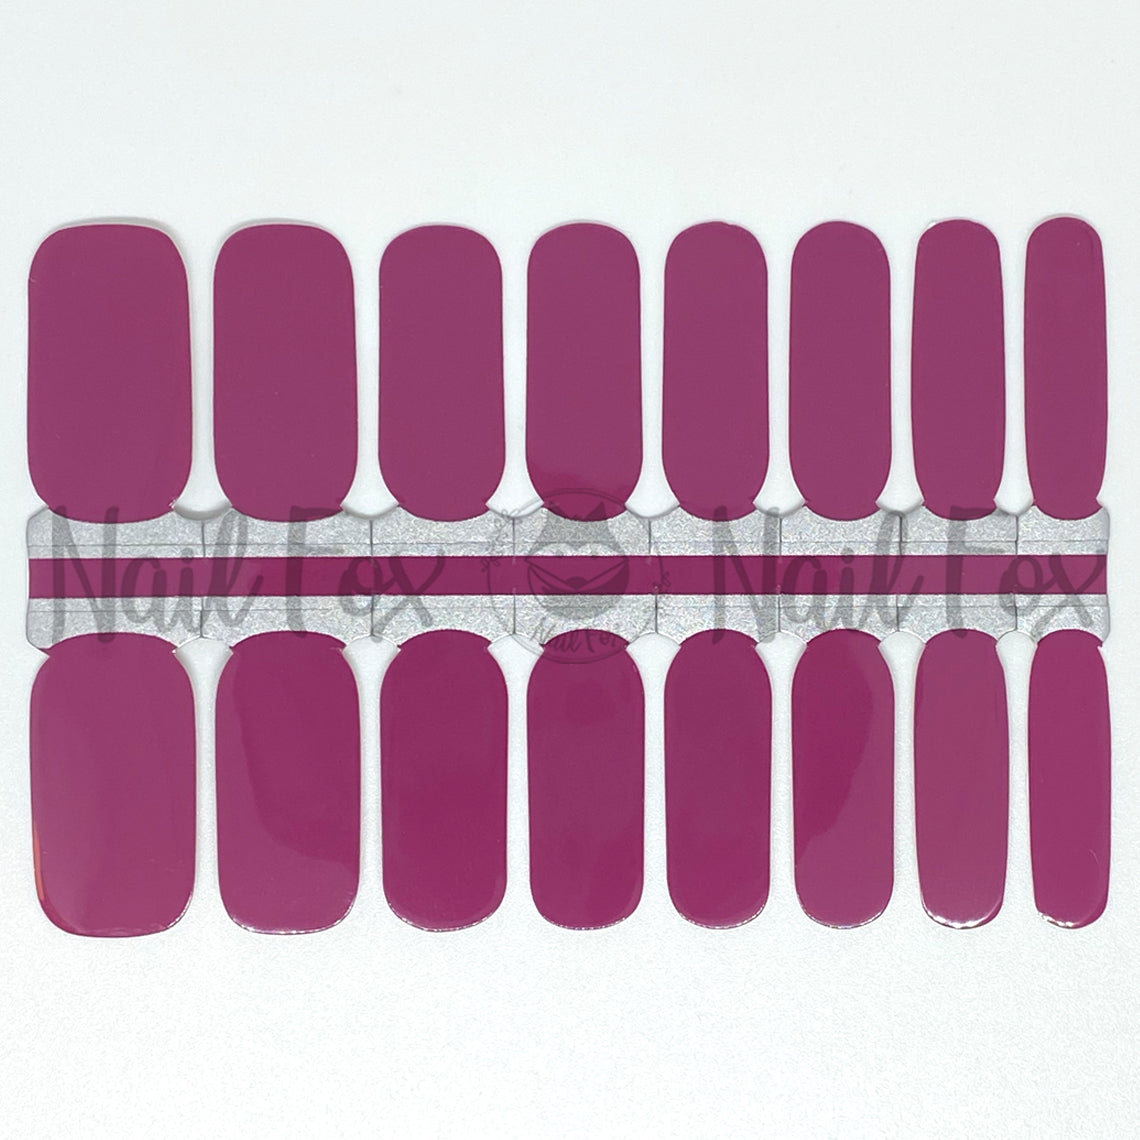 Dusty Berry Solid Nail Wraps